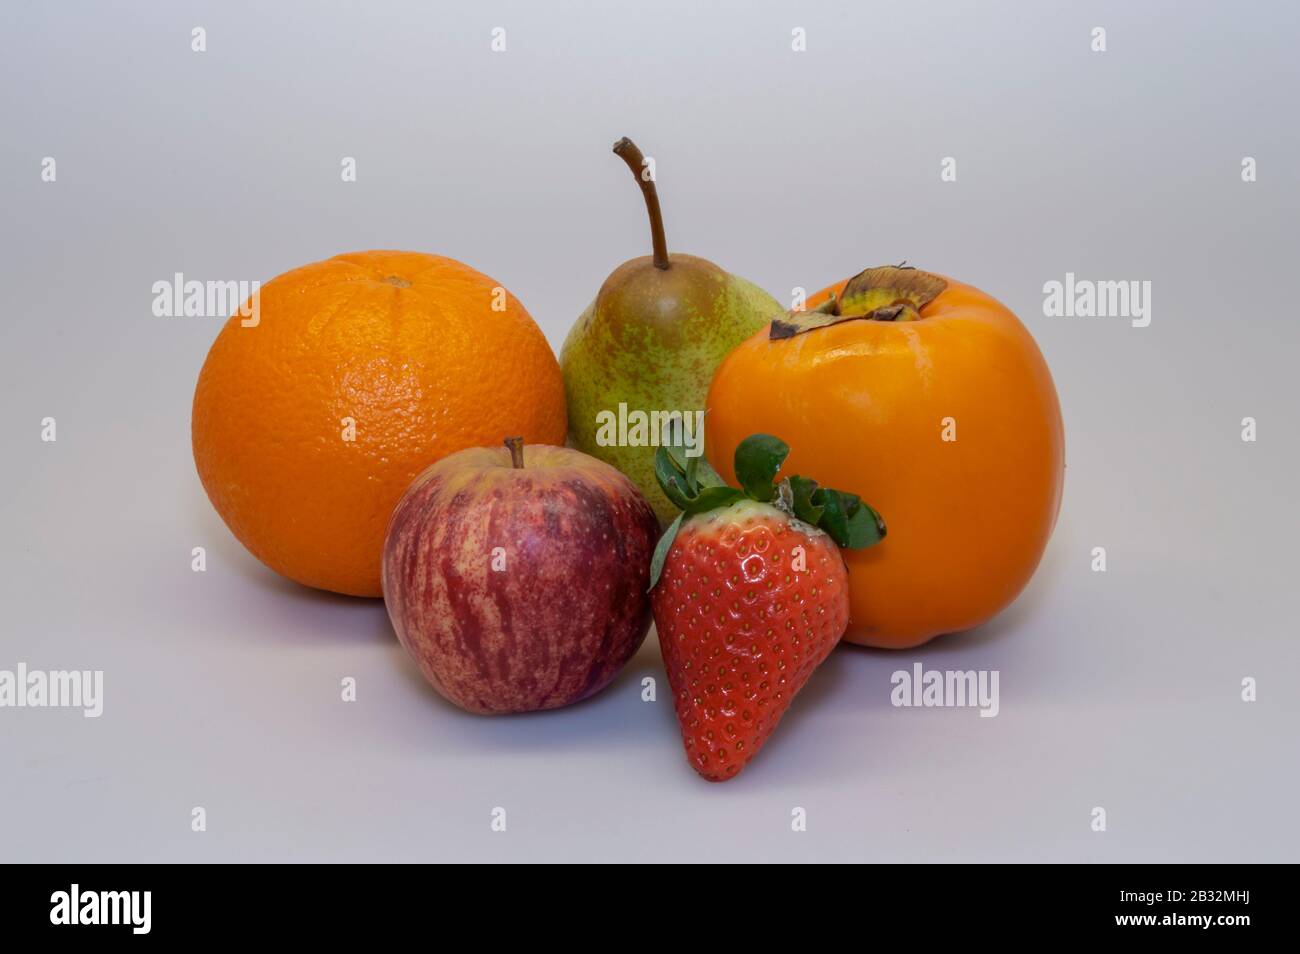 Strawberry, Apple, Persimmon, Orange, Pear Rock. Varied fruit essential for a healthy and balanced diet. Stock Photo